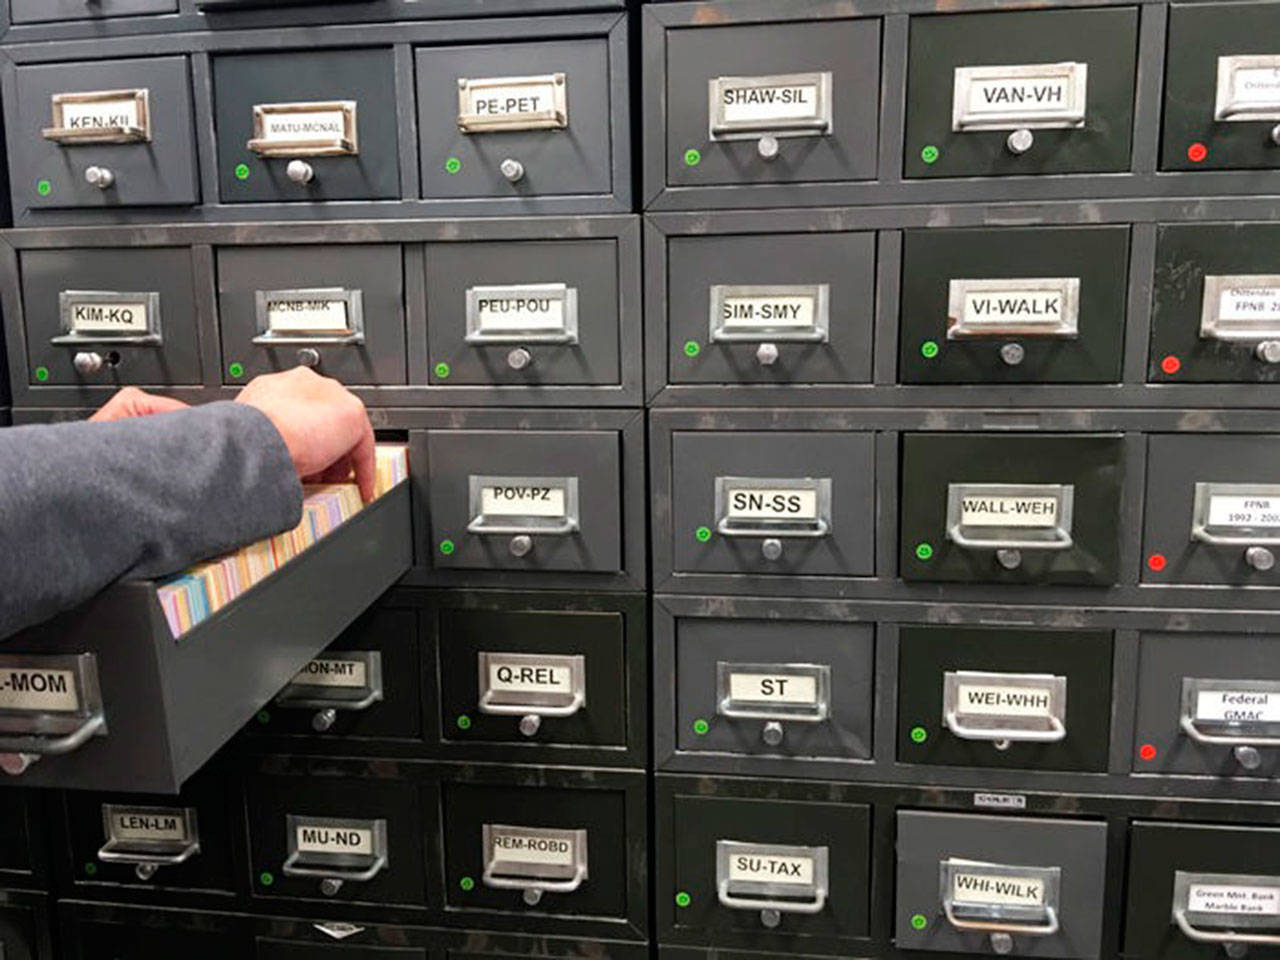 Open drawer, a step for open records: by law, agencies may charge a default rate for duplicating paper copies of public records if the actual costs are indeterminate. A new proposal would set a default rate for fulfilling requests for electronic records. Photo from Wikimedia Commons